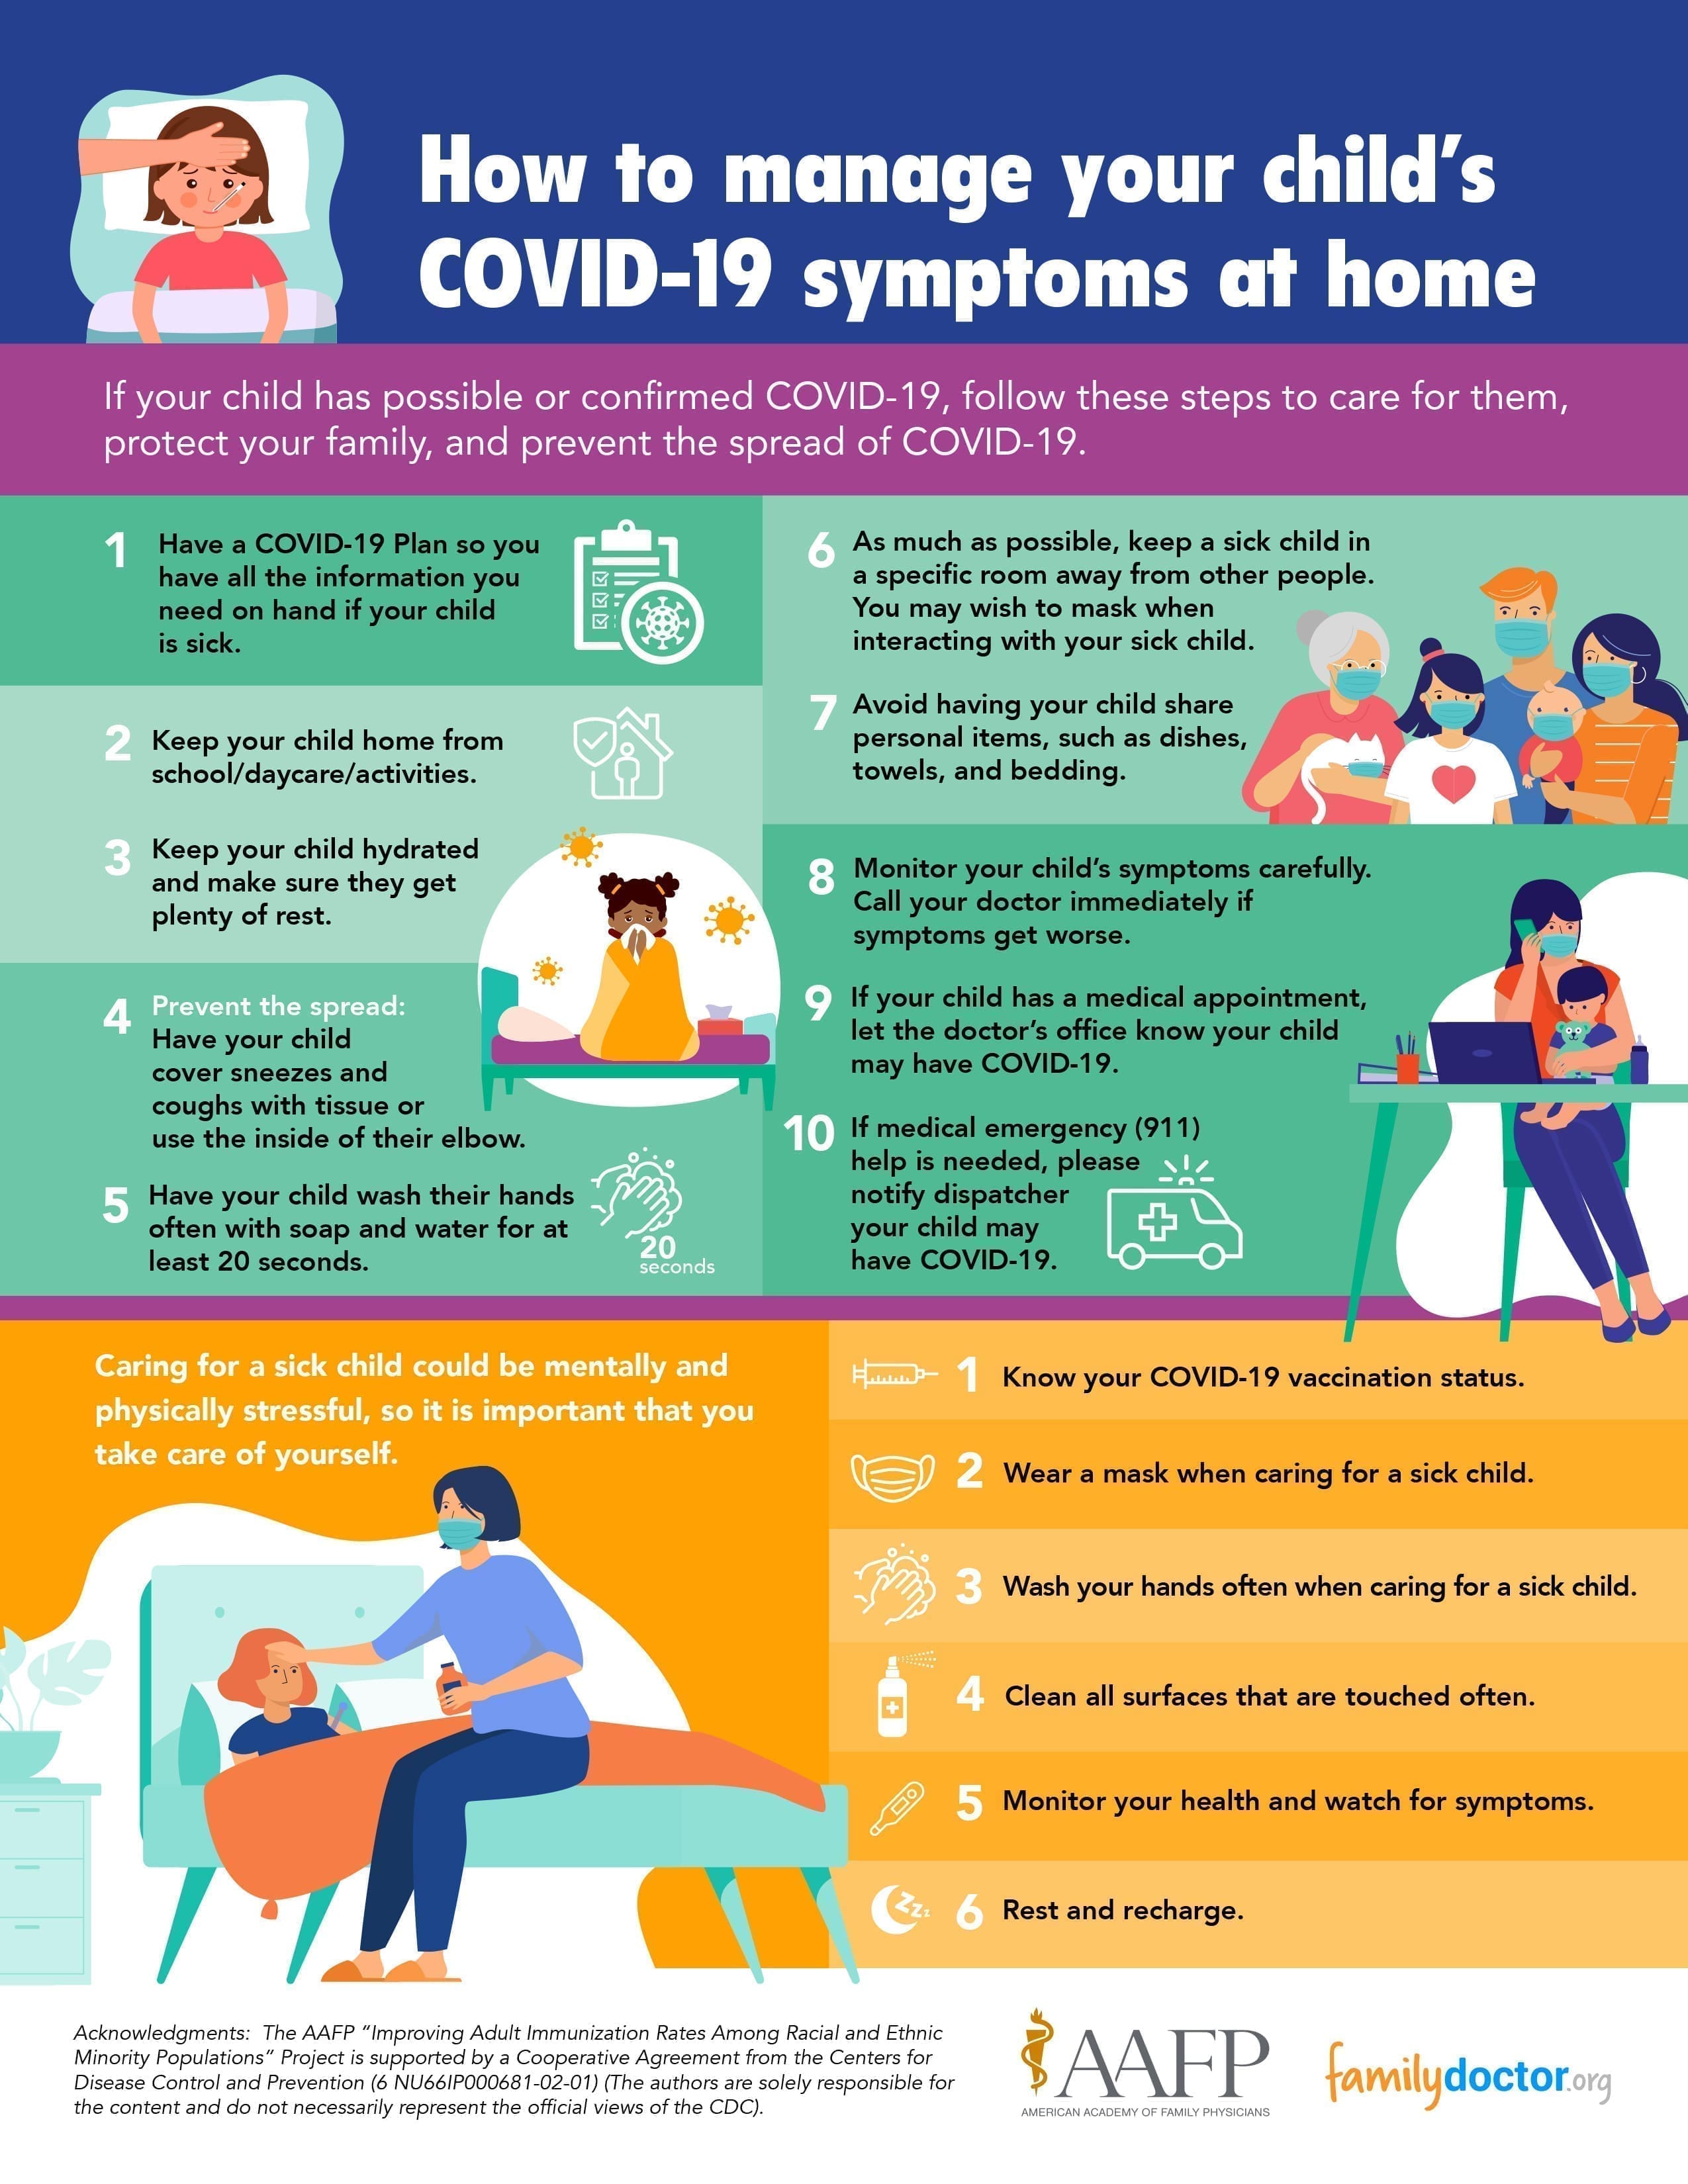 Colorful infographic showing 10 ways to manage a child's COVID-19 symptoms at home